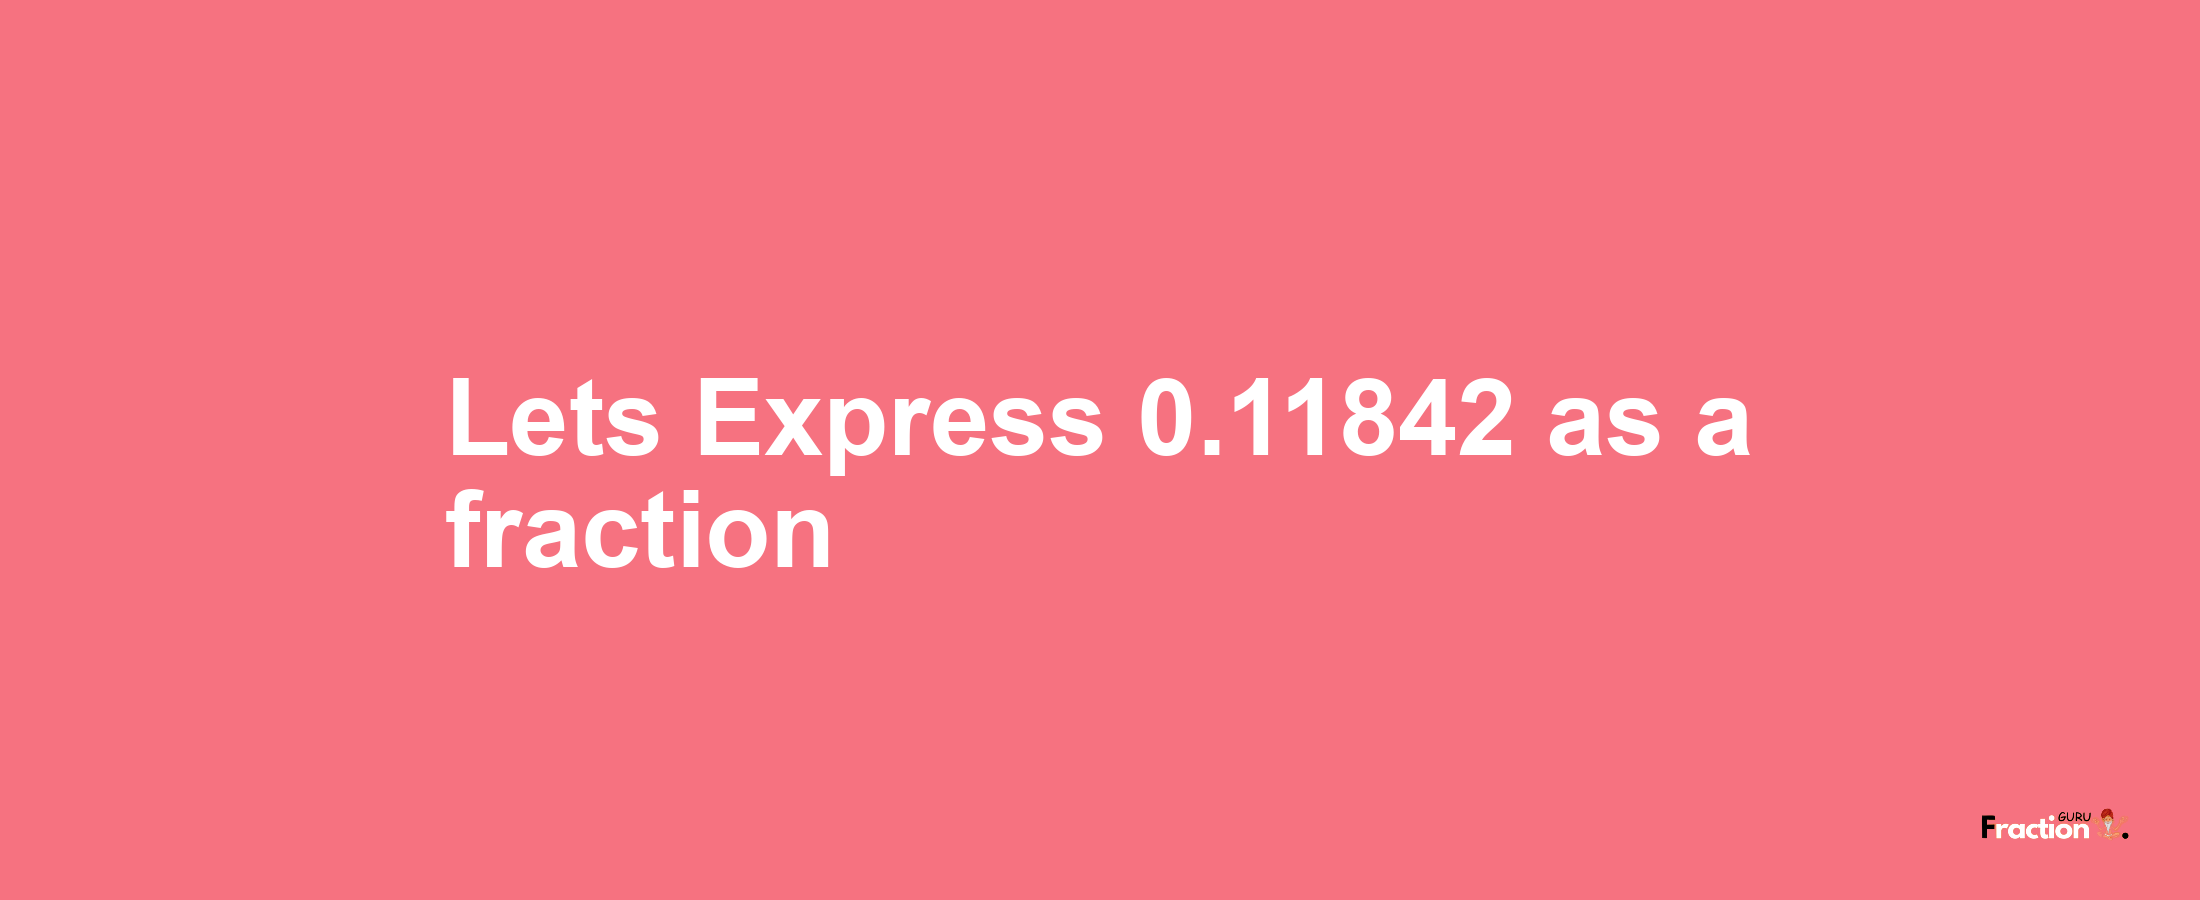 Lets Express 0.11842 as afraction